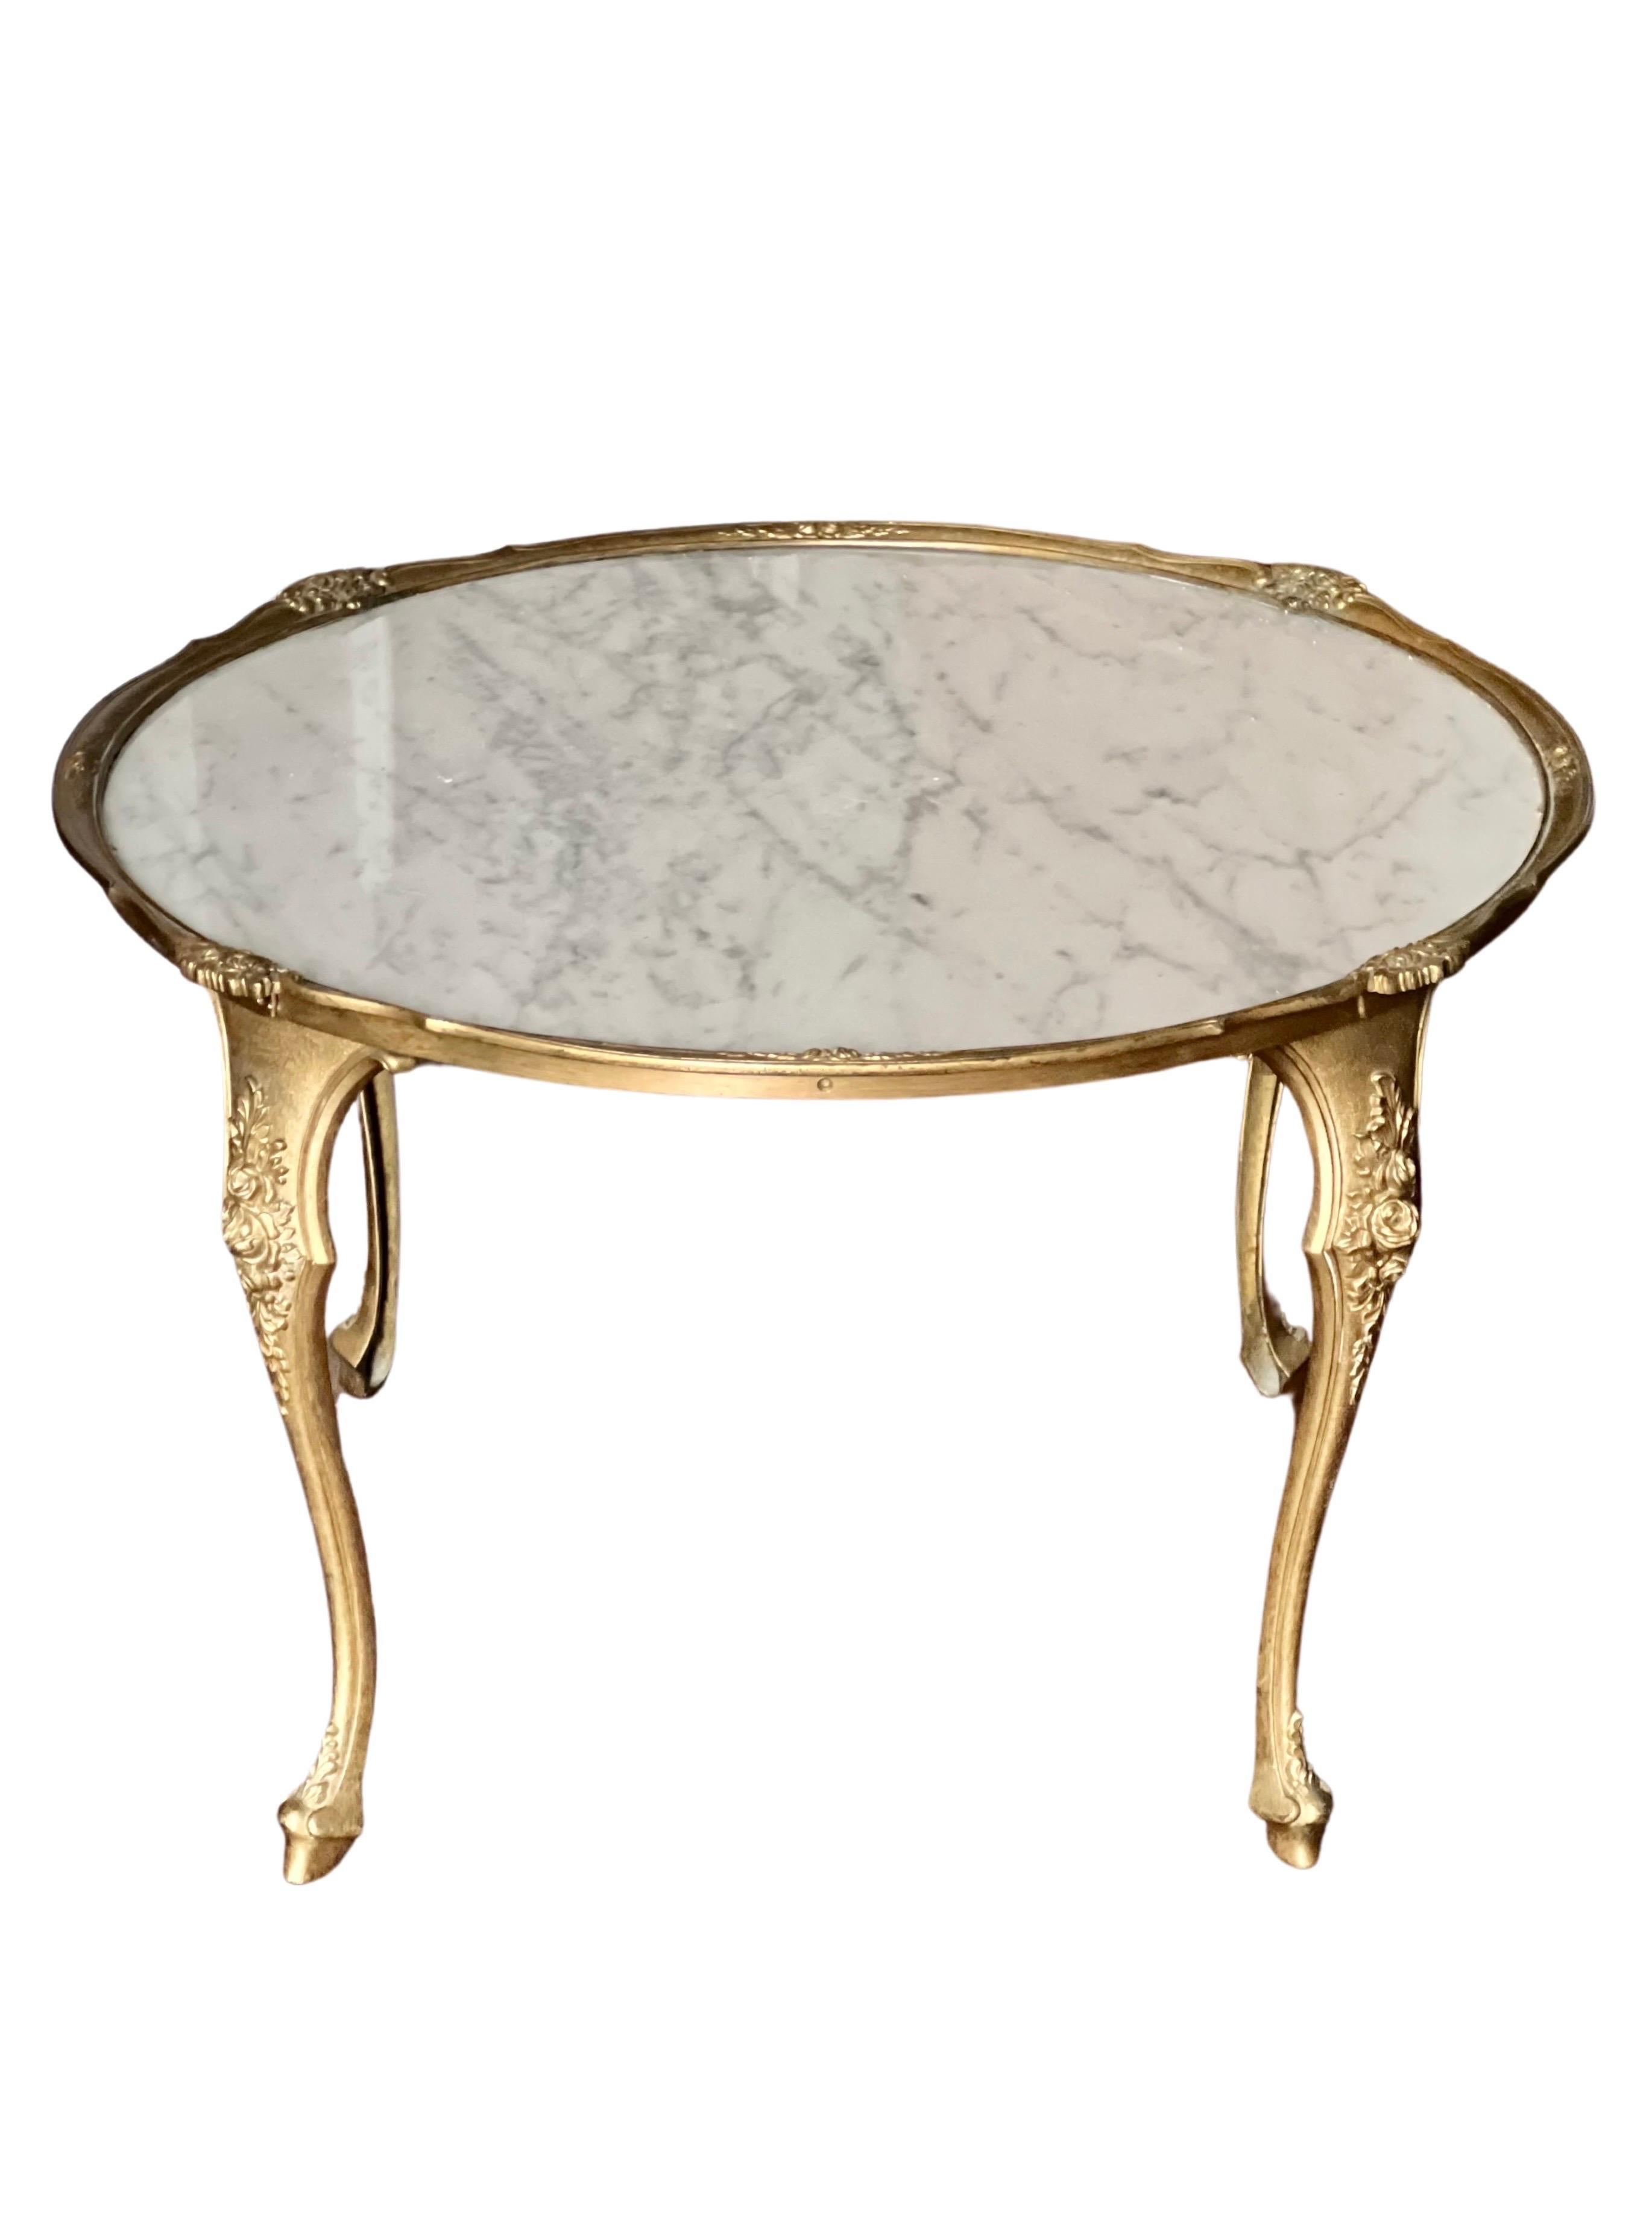 Vintage French Empire solid brass and Carrara marble coffee, cocktail or side table, France, c. 1930's.

This petite, elegant table is beautifully adorned with delicate floral motifs throughout and graceful cabriole legs. The inset marble top is